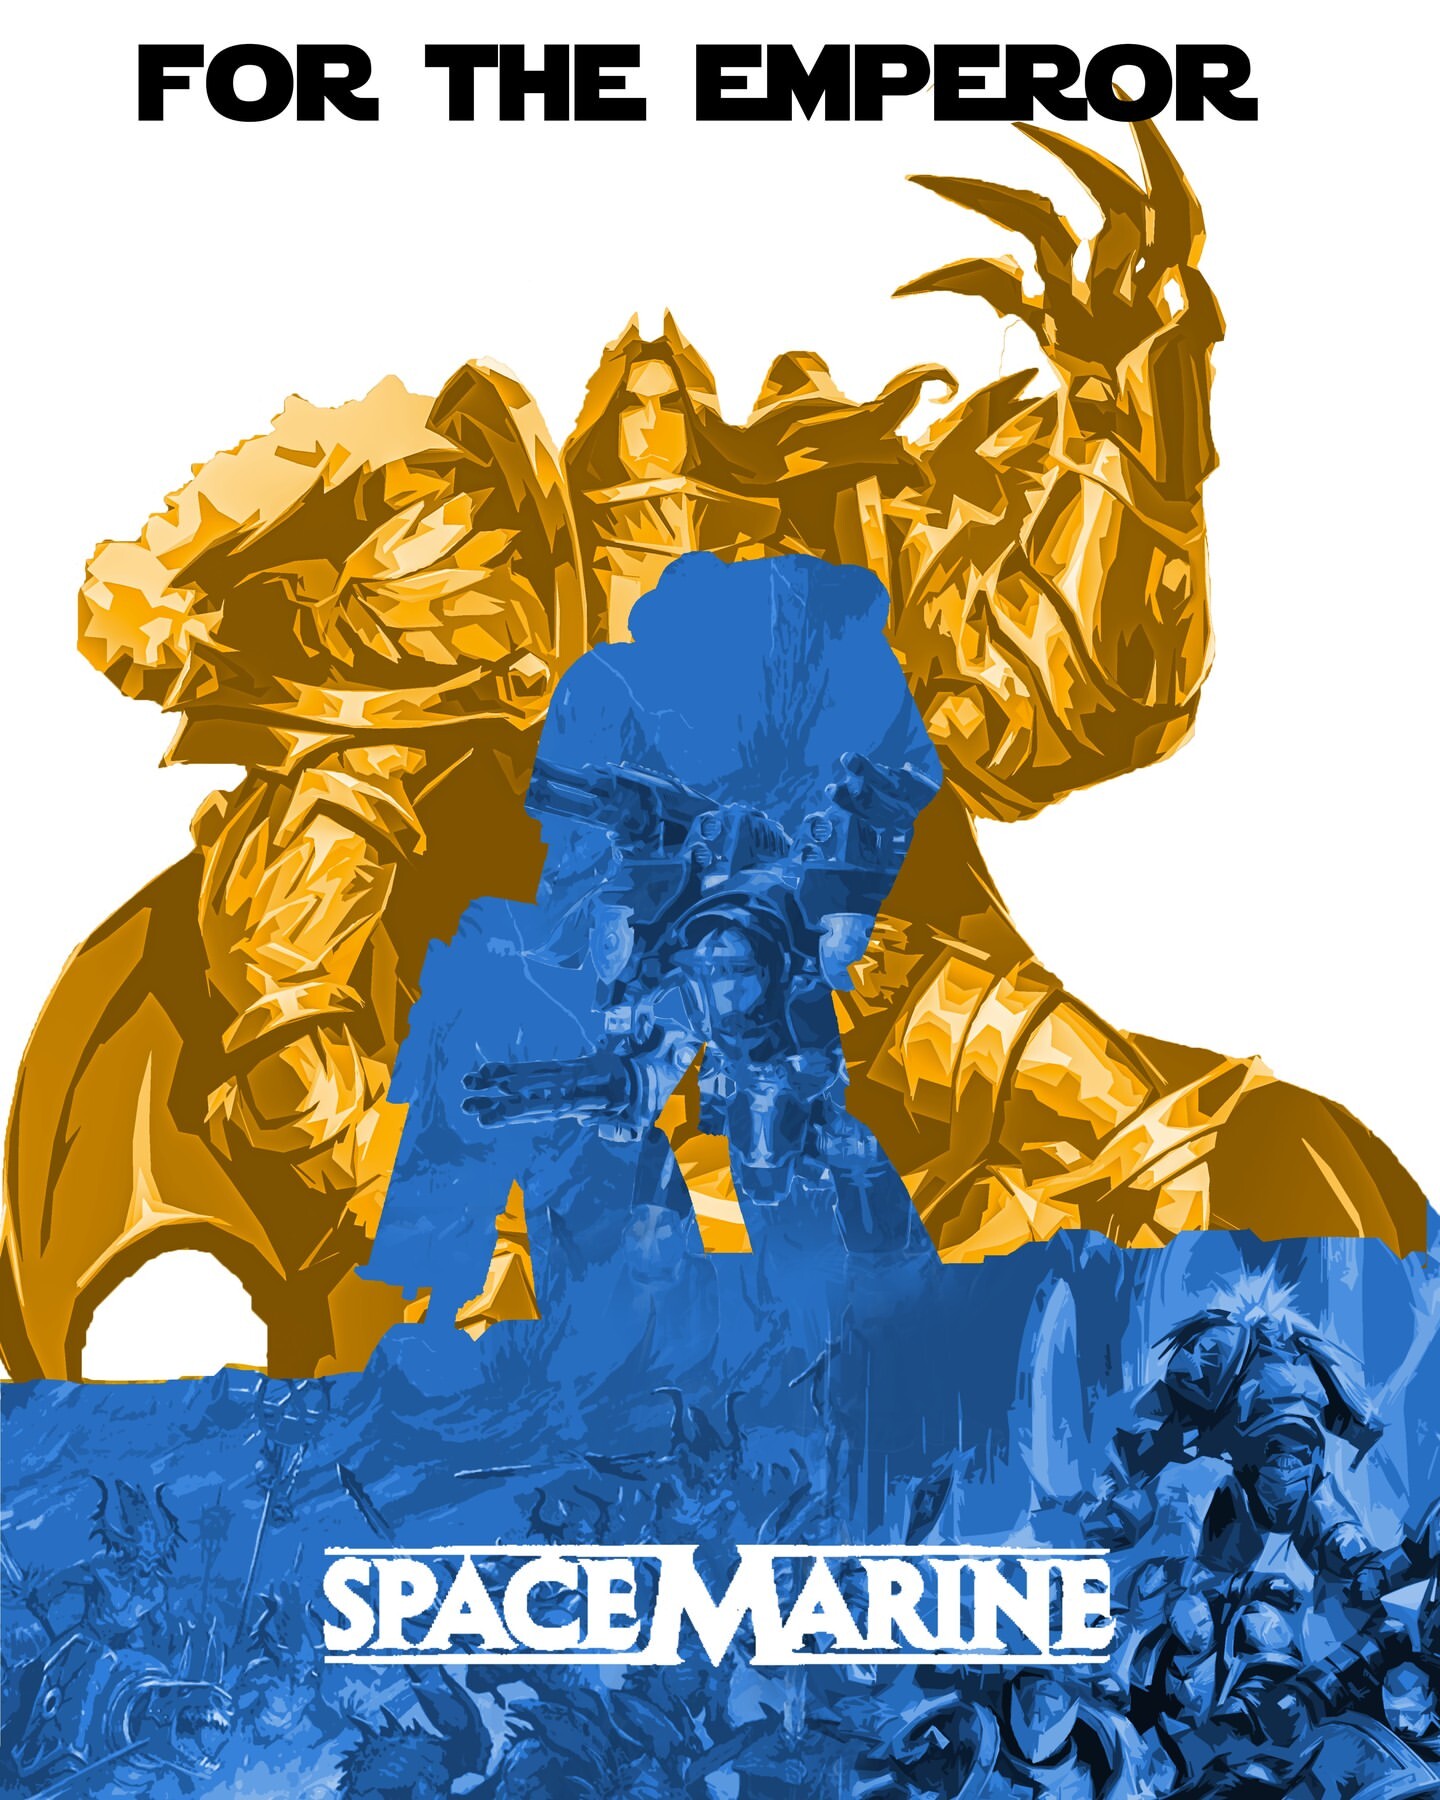 I found it mostly impossible to find a minimalist Warhammer phone wallpaper.  So I got bored at the airport and made this on Adobe Express :  r/Warhammer40k